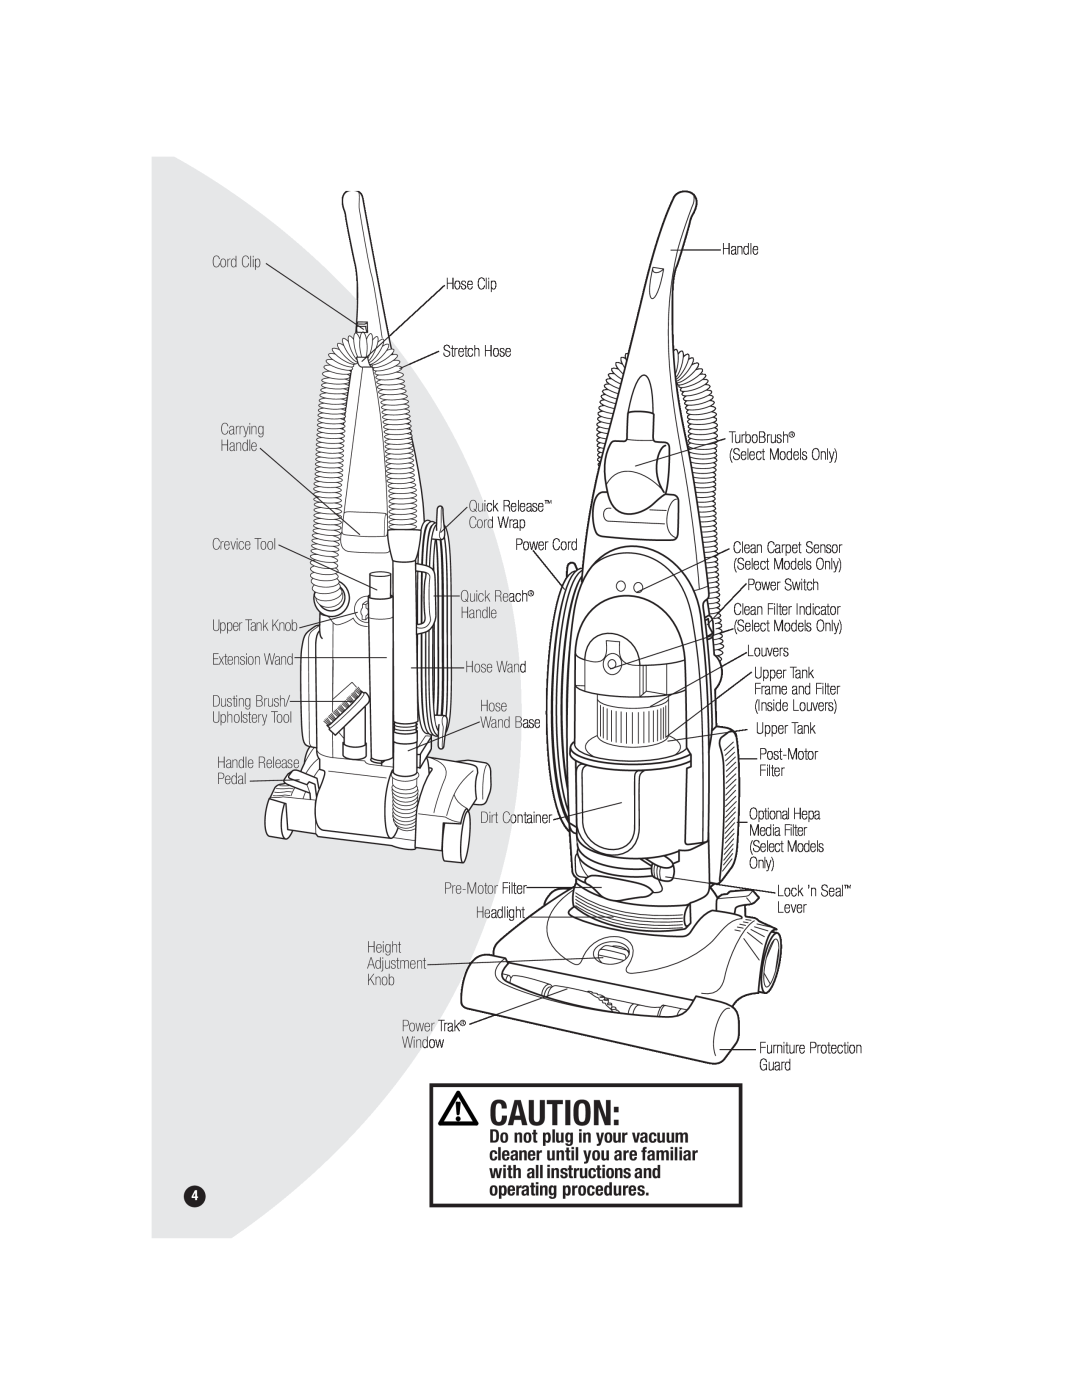 Bissell 3594 with all instructions and, operating procedures, Do not plug in your vacuum, cleaner until you are familiar 